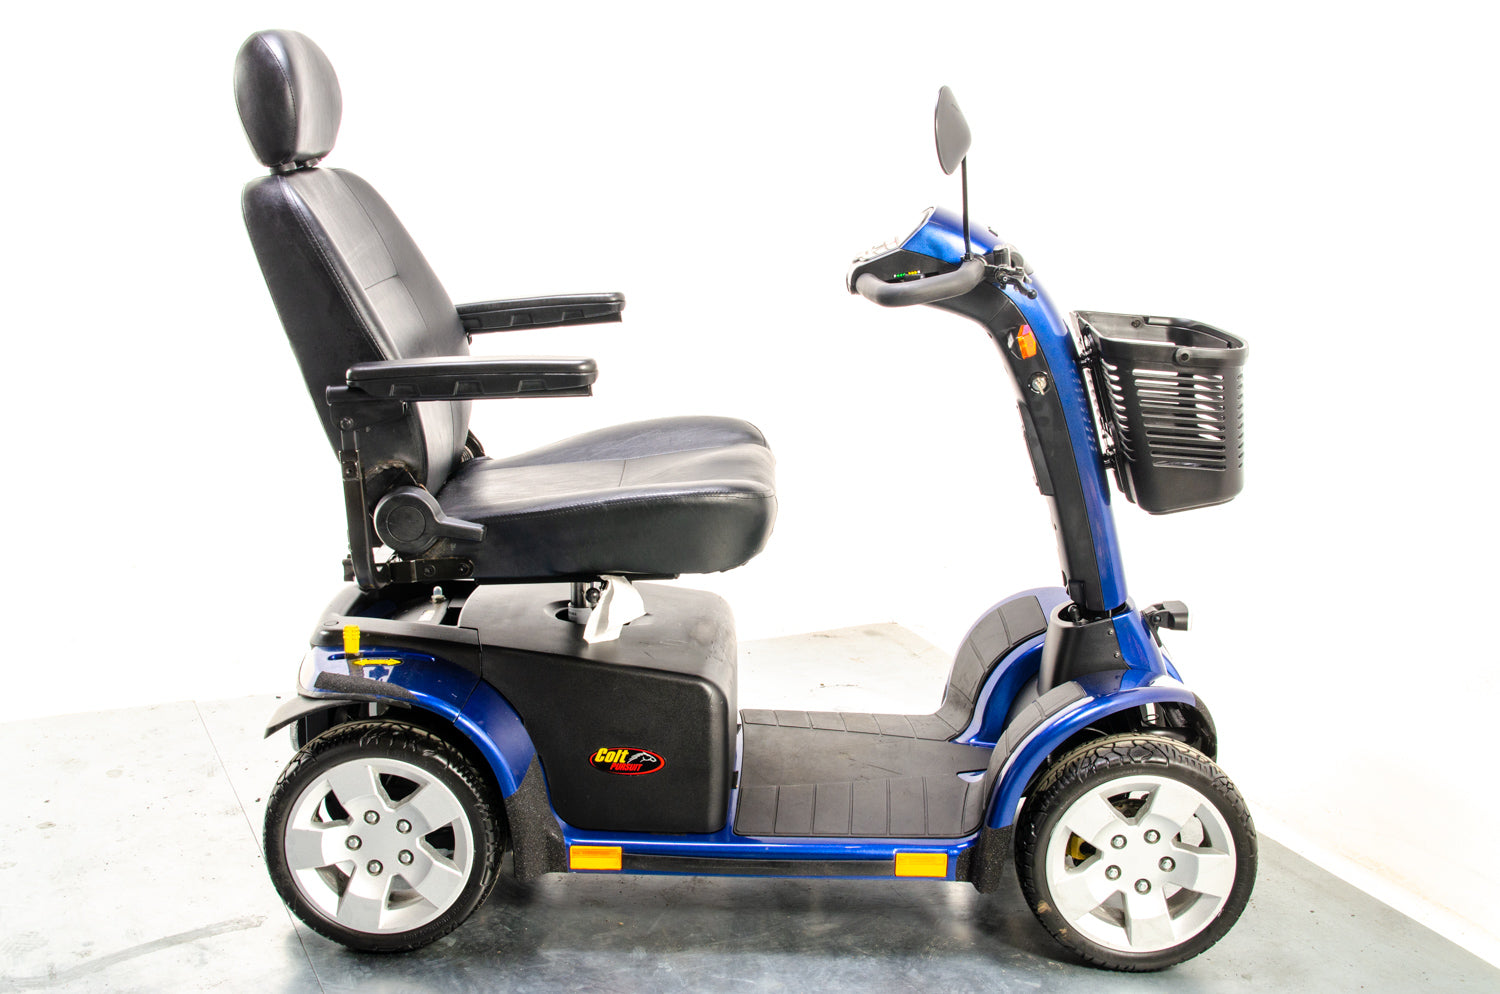 Pride Colt Pursuit All-Terrain Off-Road Used Mobility Scooter 8mph Transportable Large Off-Road Road Legal Blue 03527